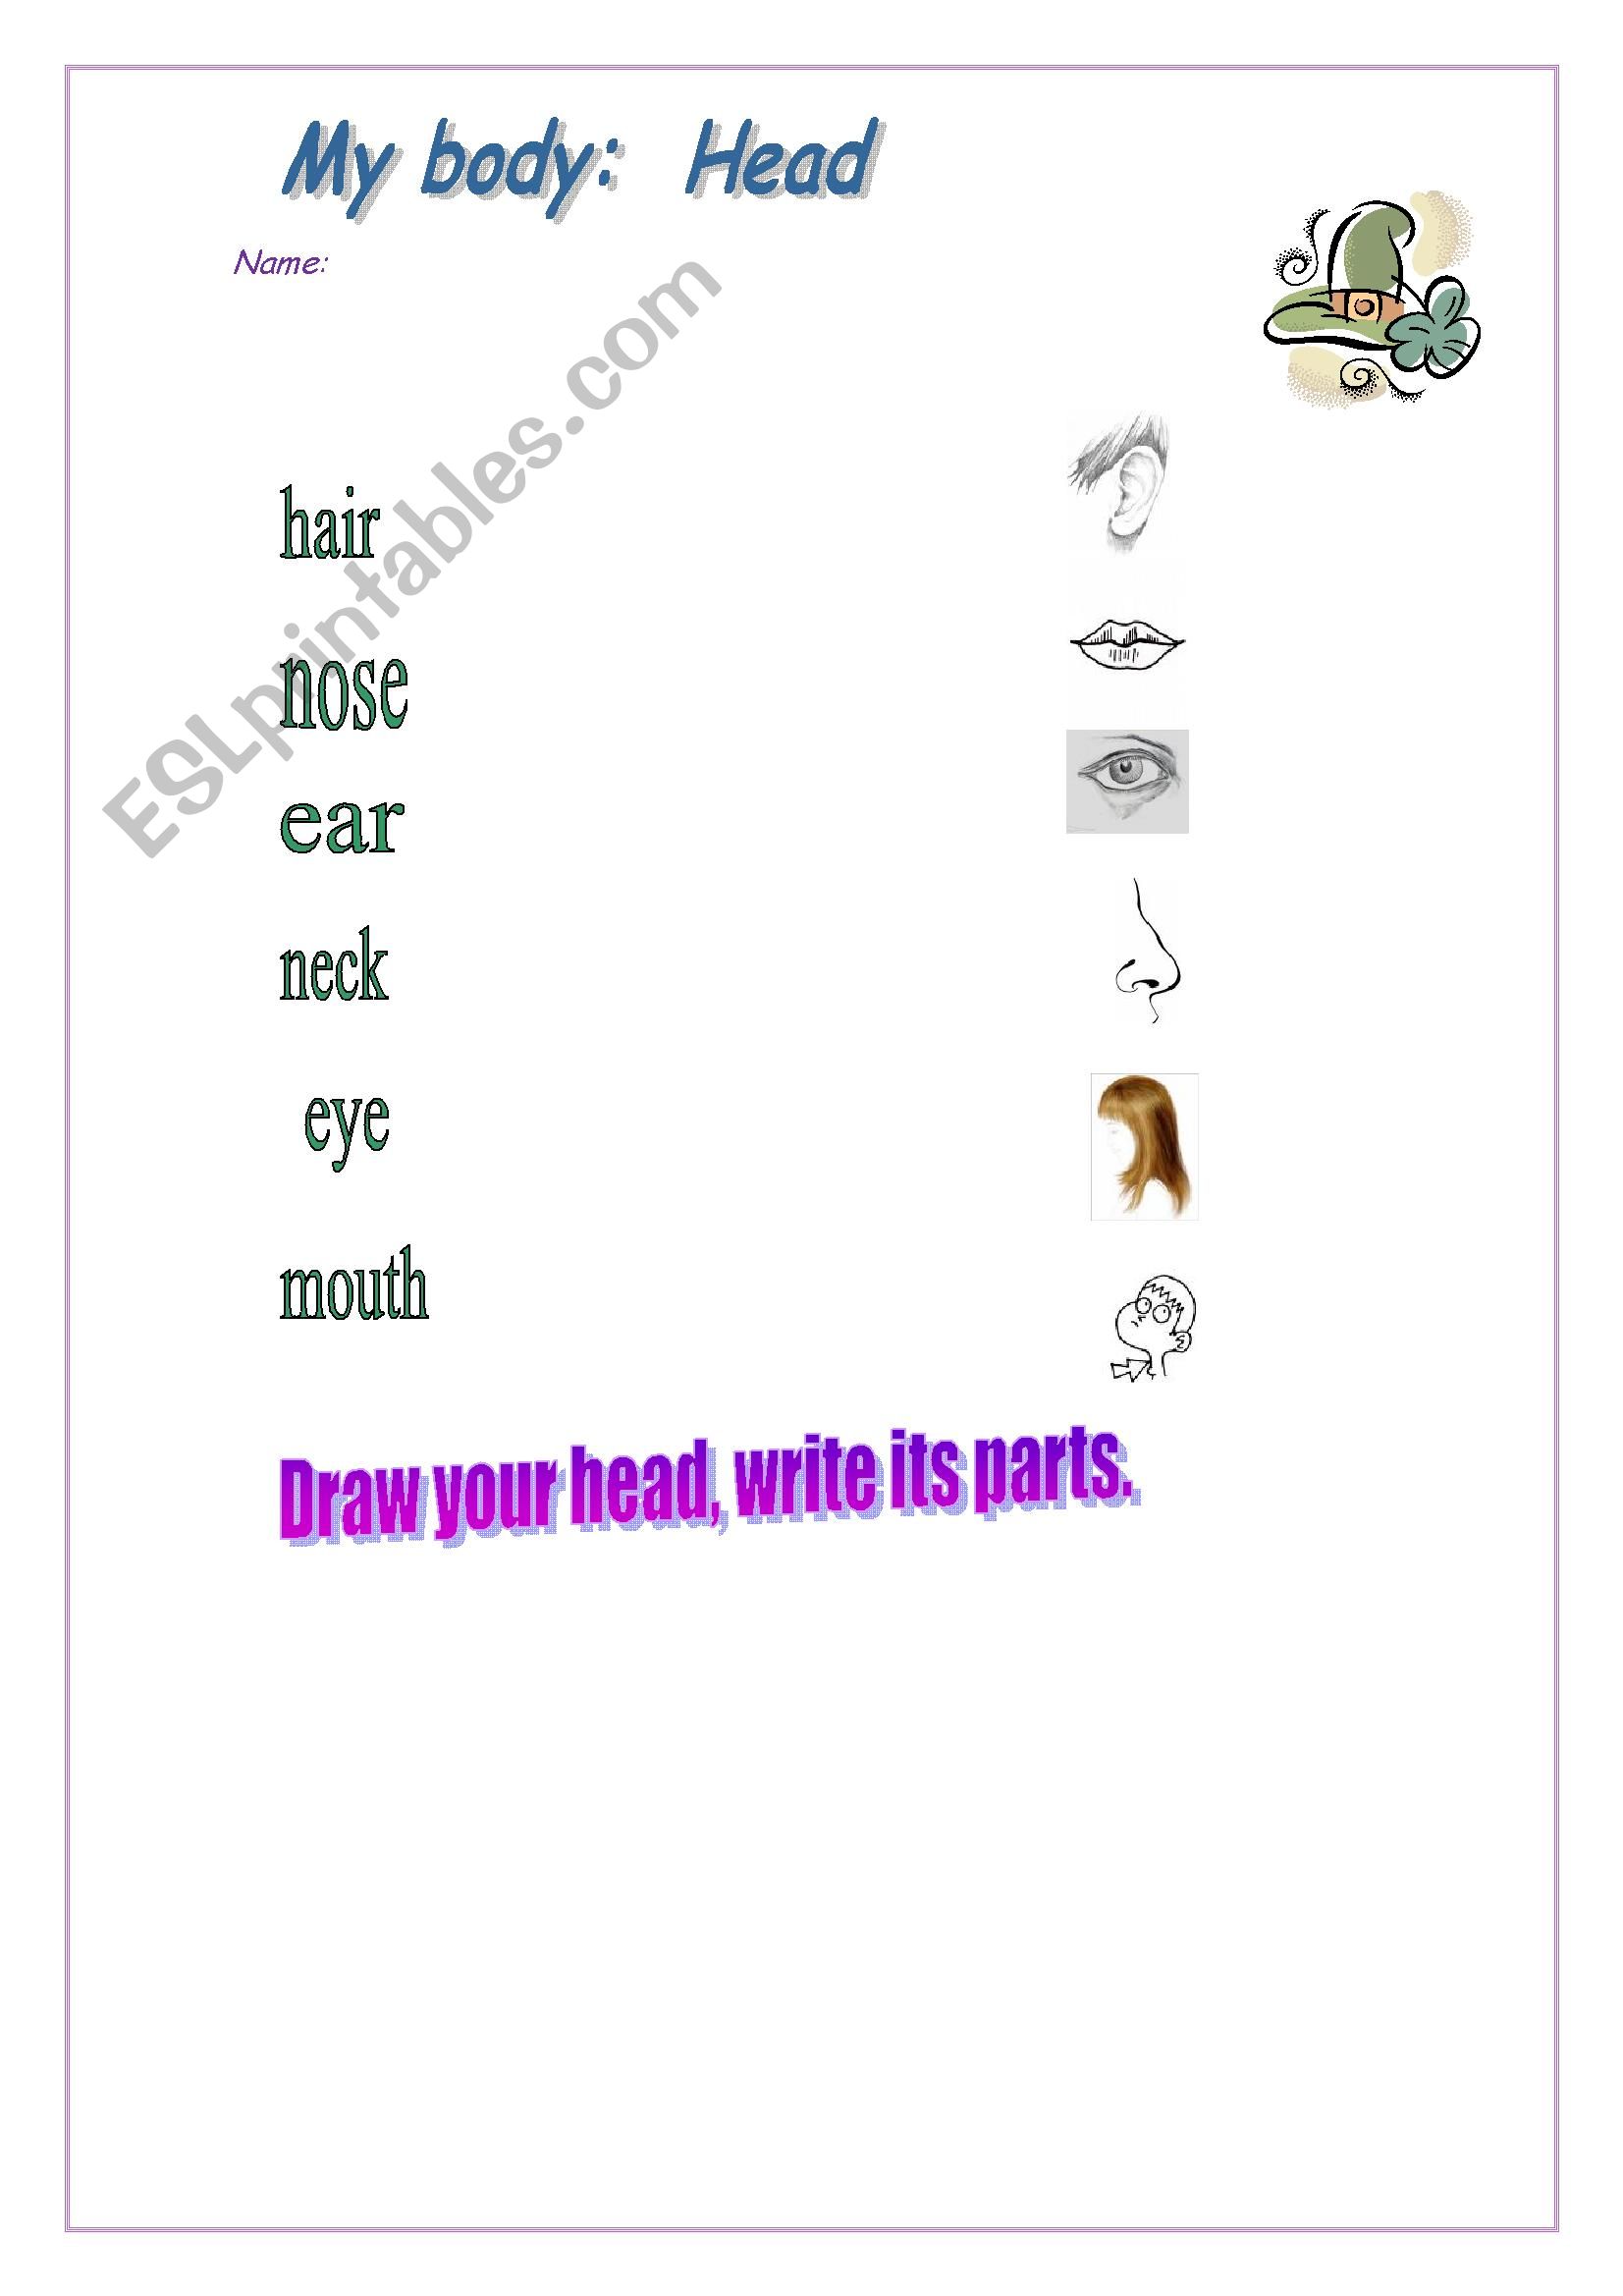 Parts of the body: Head worksheet